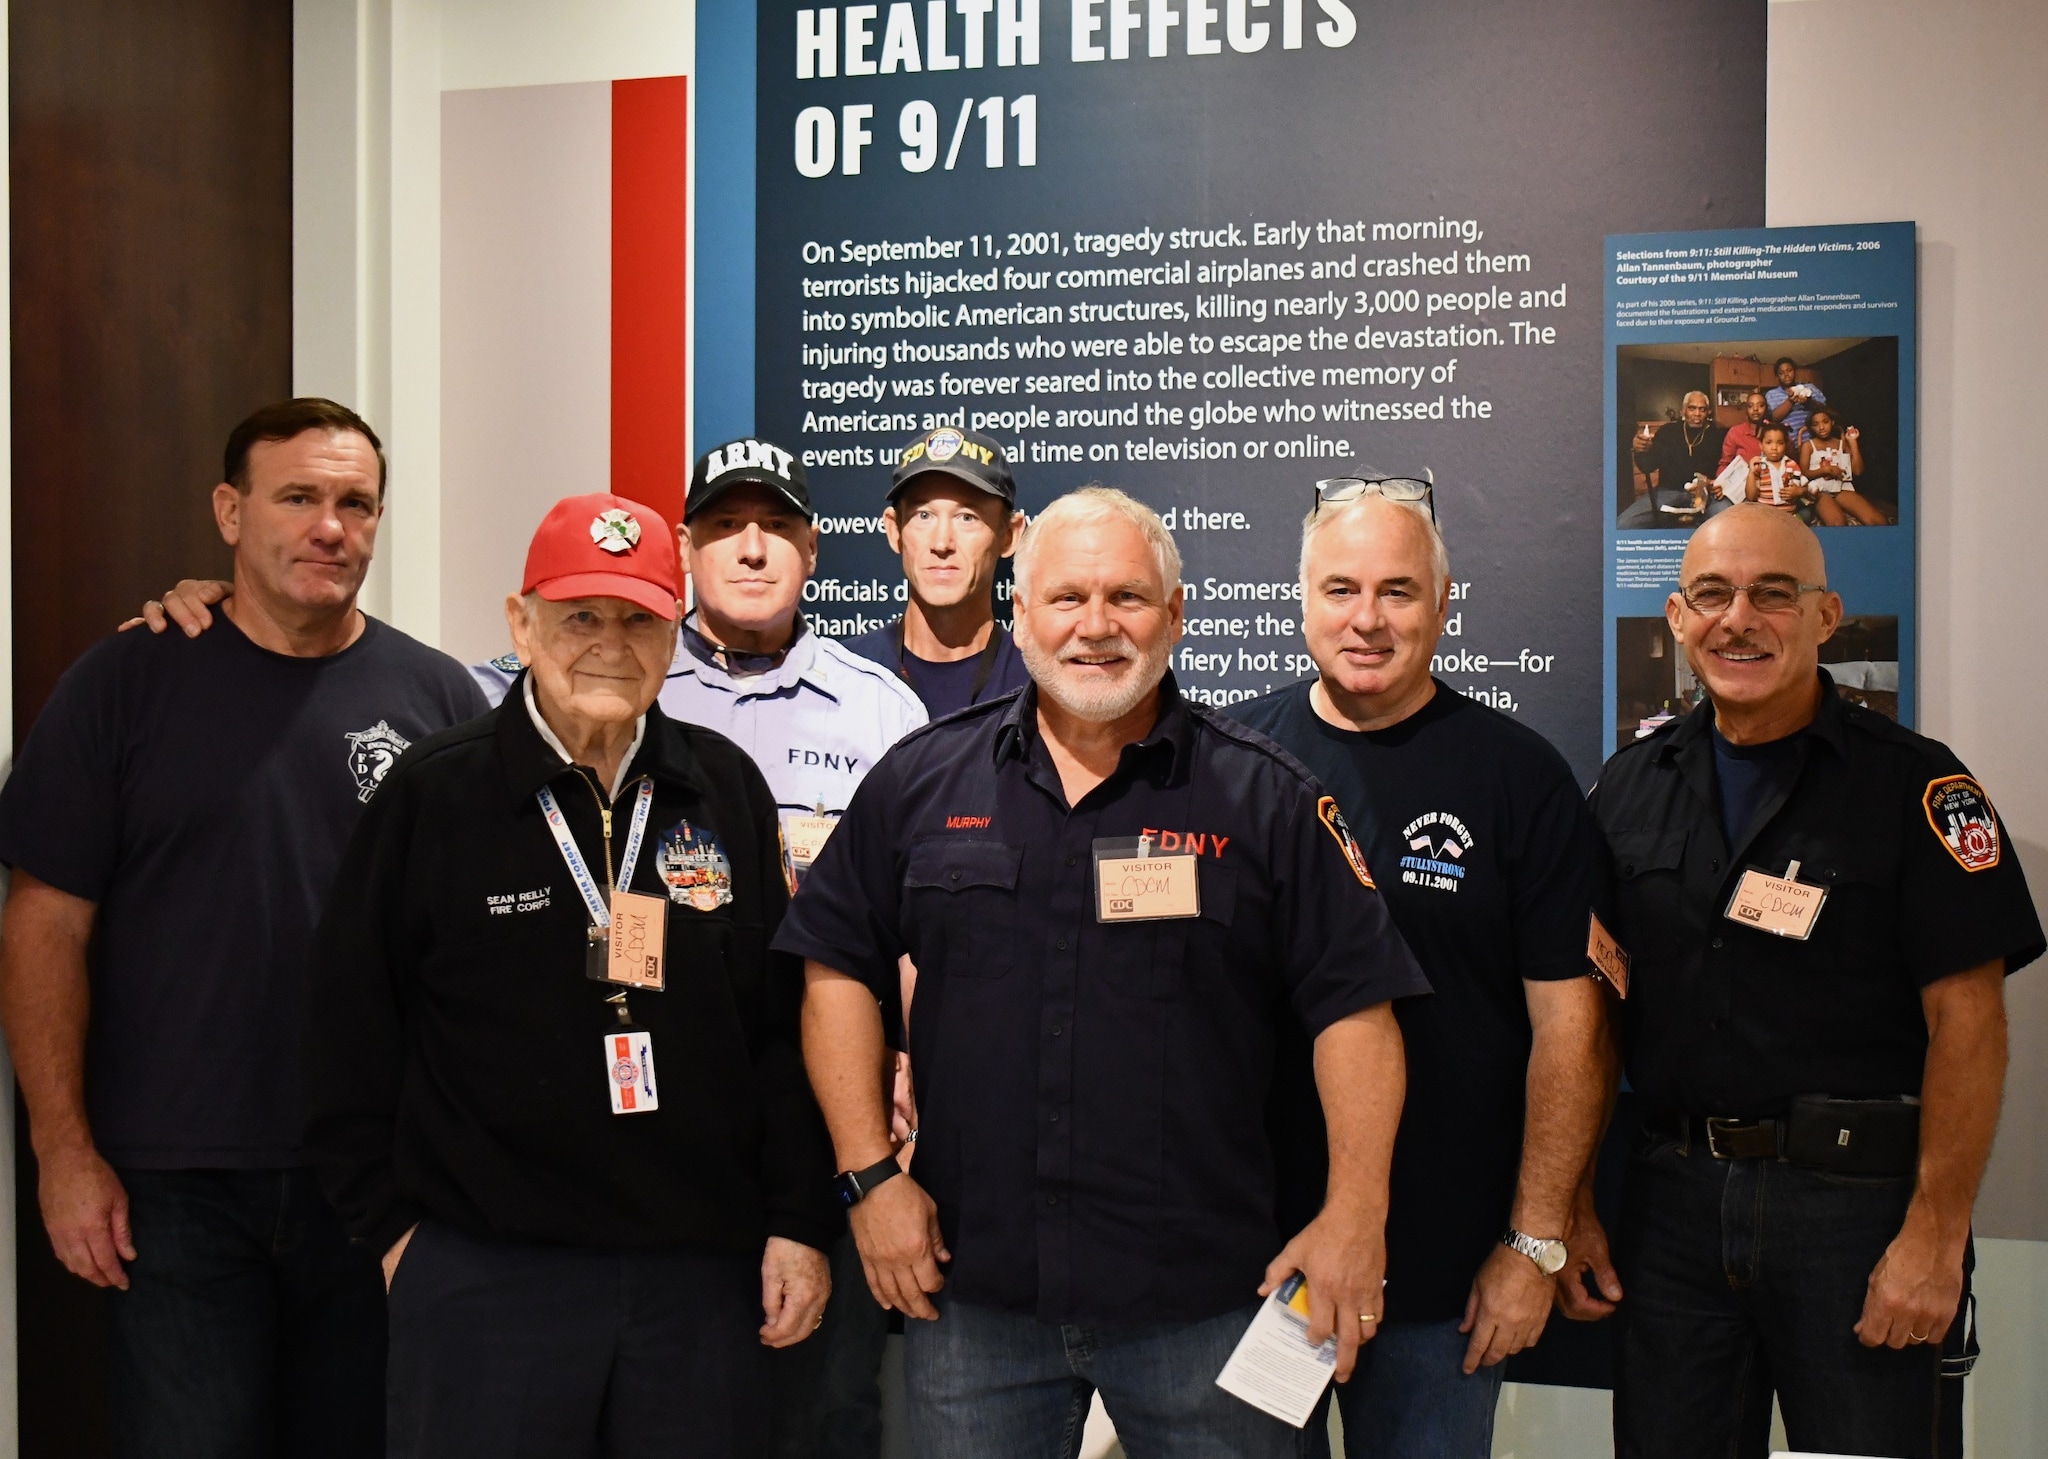 Tim Murphy, retired NYC firefighter and WTC Health Program member, stands proudly with a group of fellow 9/11 responders who are members of the NYC Shields of Georgia, a organization founded by Tim. The joyous group is captured with smiles during a memorable moment at the Health Effects of 9/11 exhibition at the CDC museum, embodying strength, camaraderie, and resilience. 